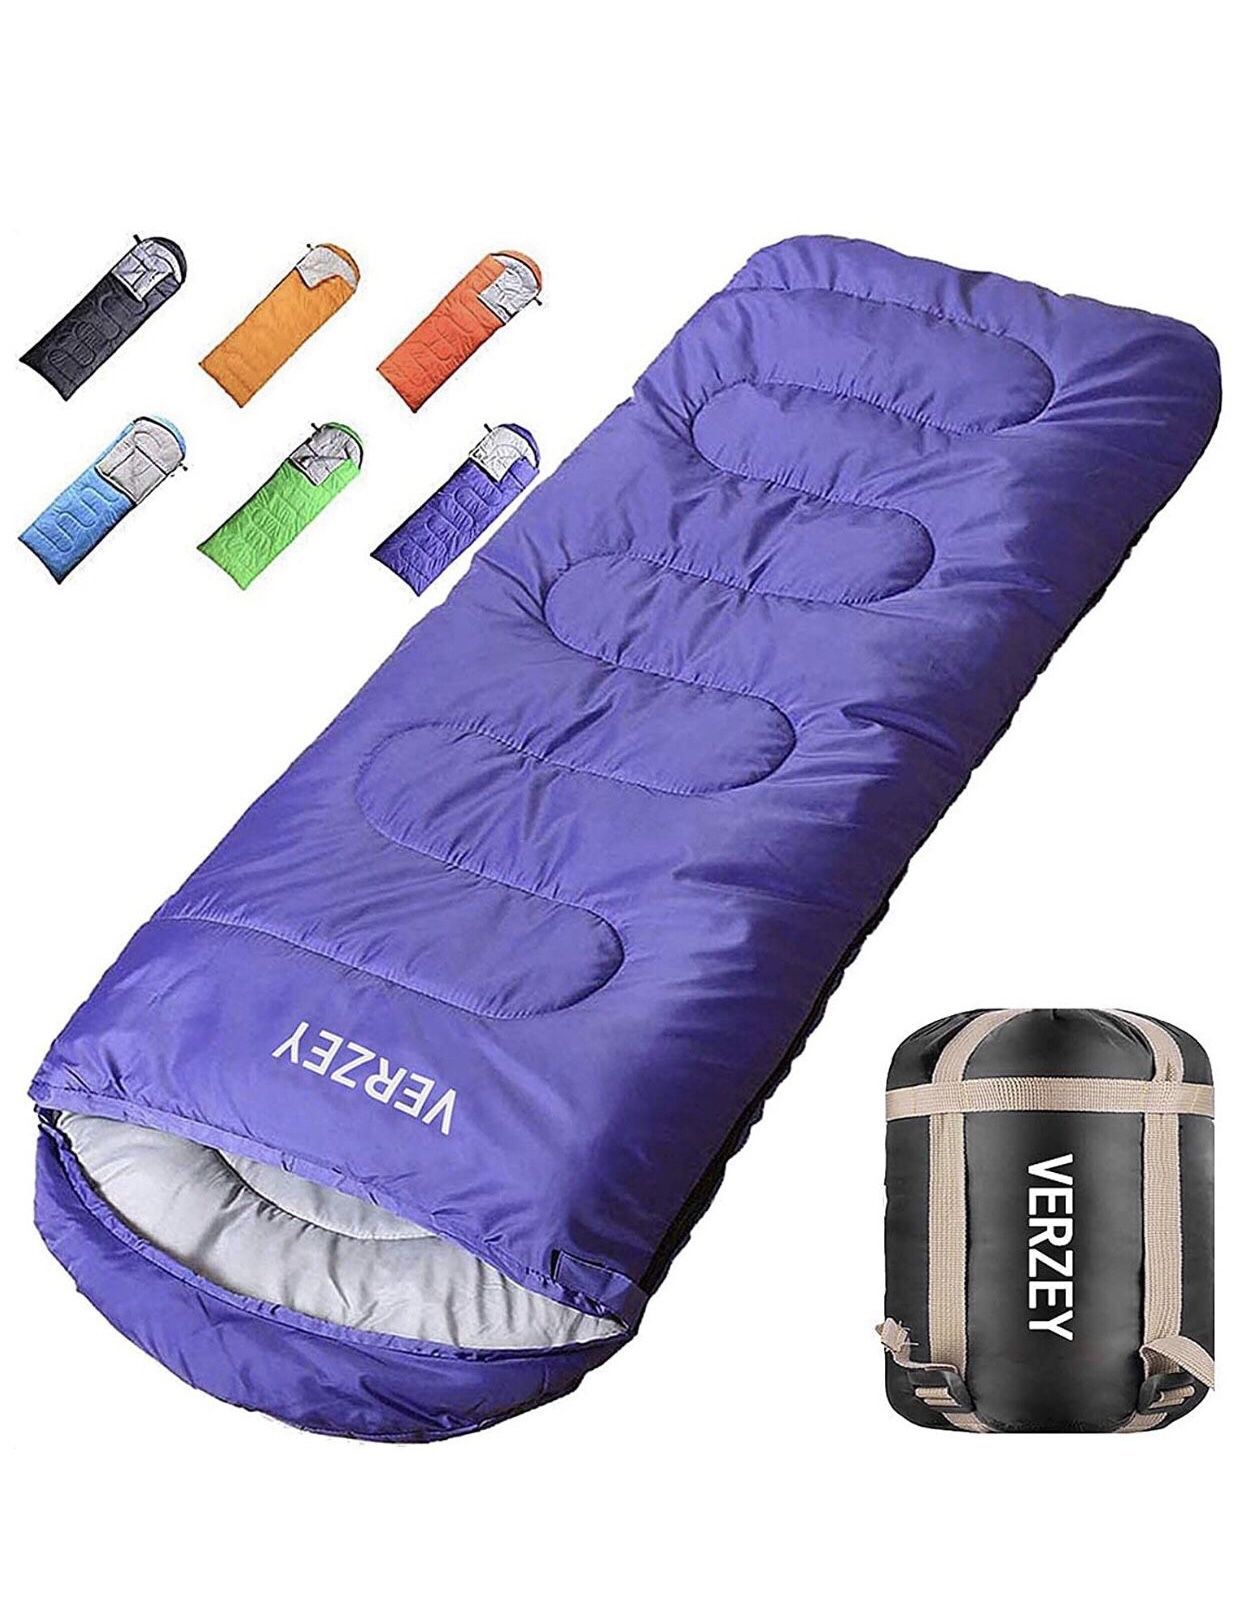 Envelope Camping Sleeping Bag for Adults, YouthKids & Boys,Great for 4 Season,Portable forBackpacking Traveling Hiking Waterproof Lightweight(purple)